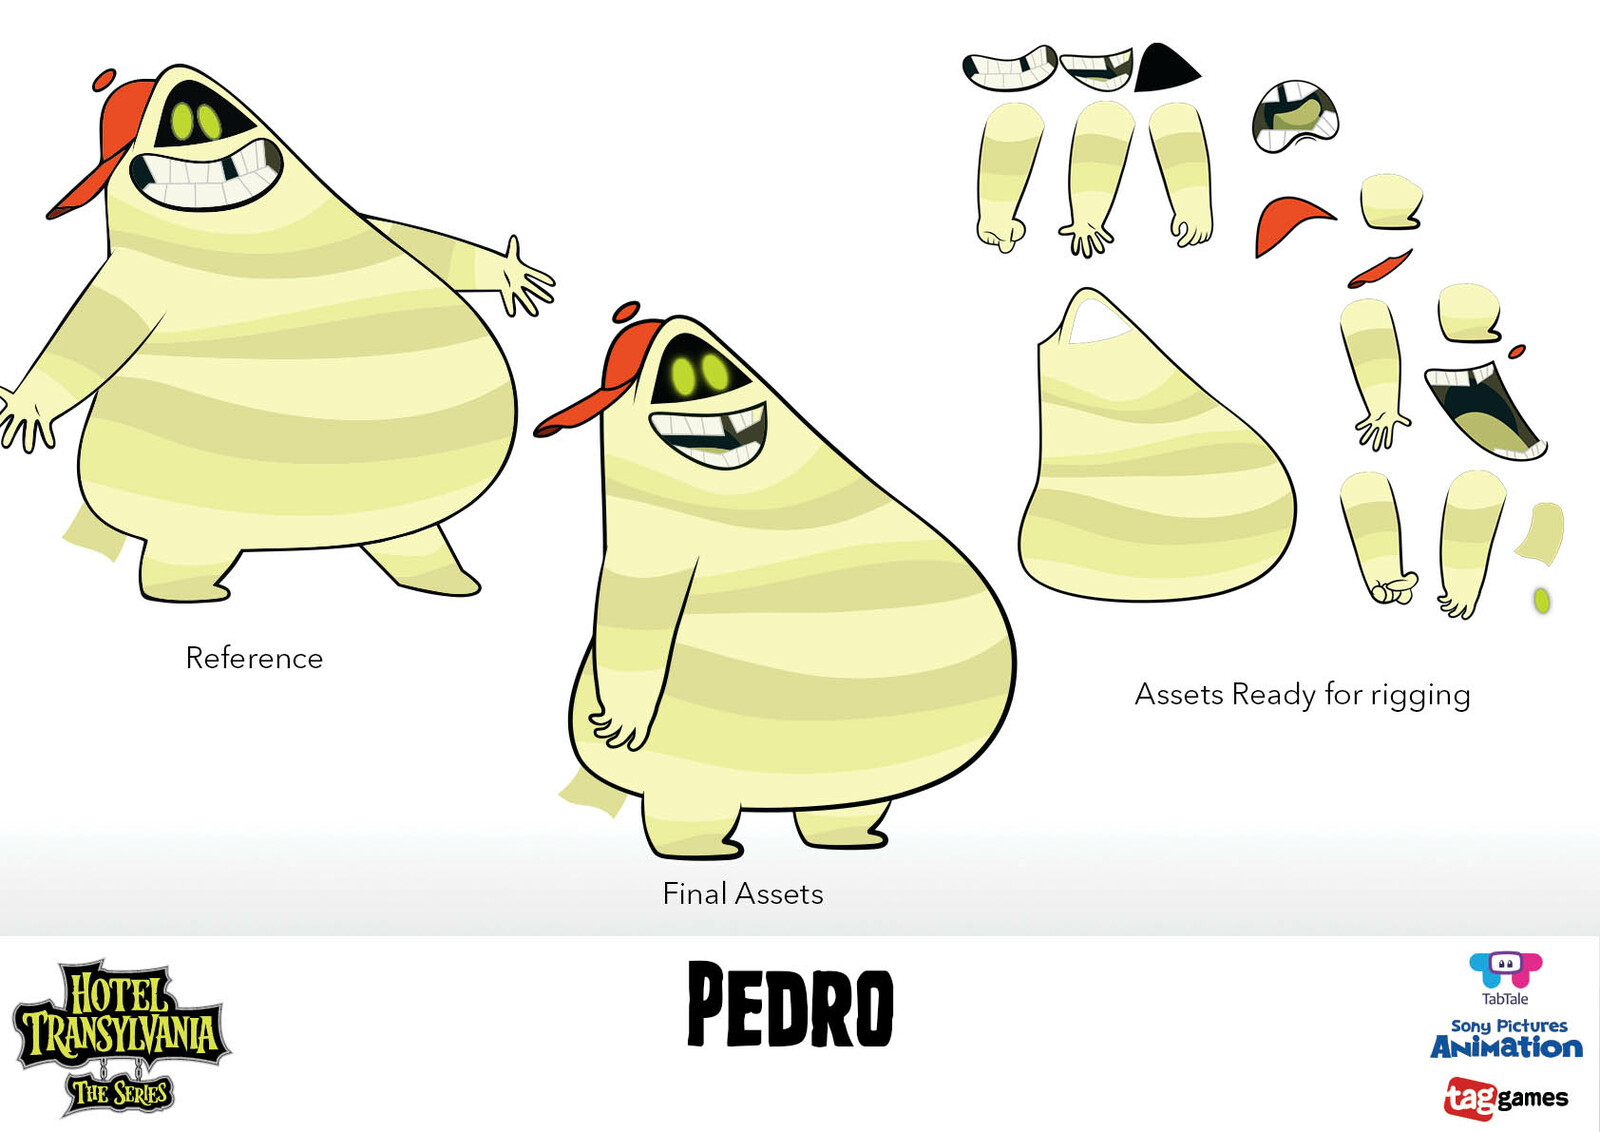 Character Assets - Pedro